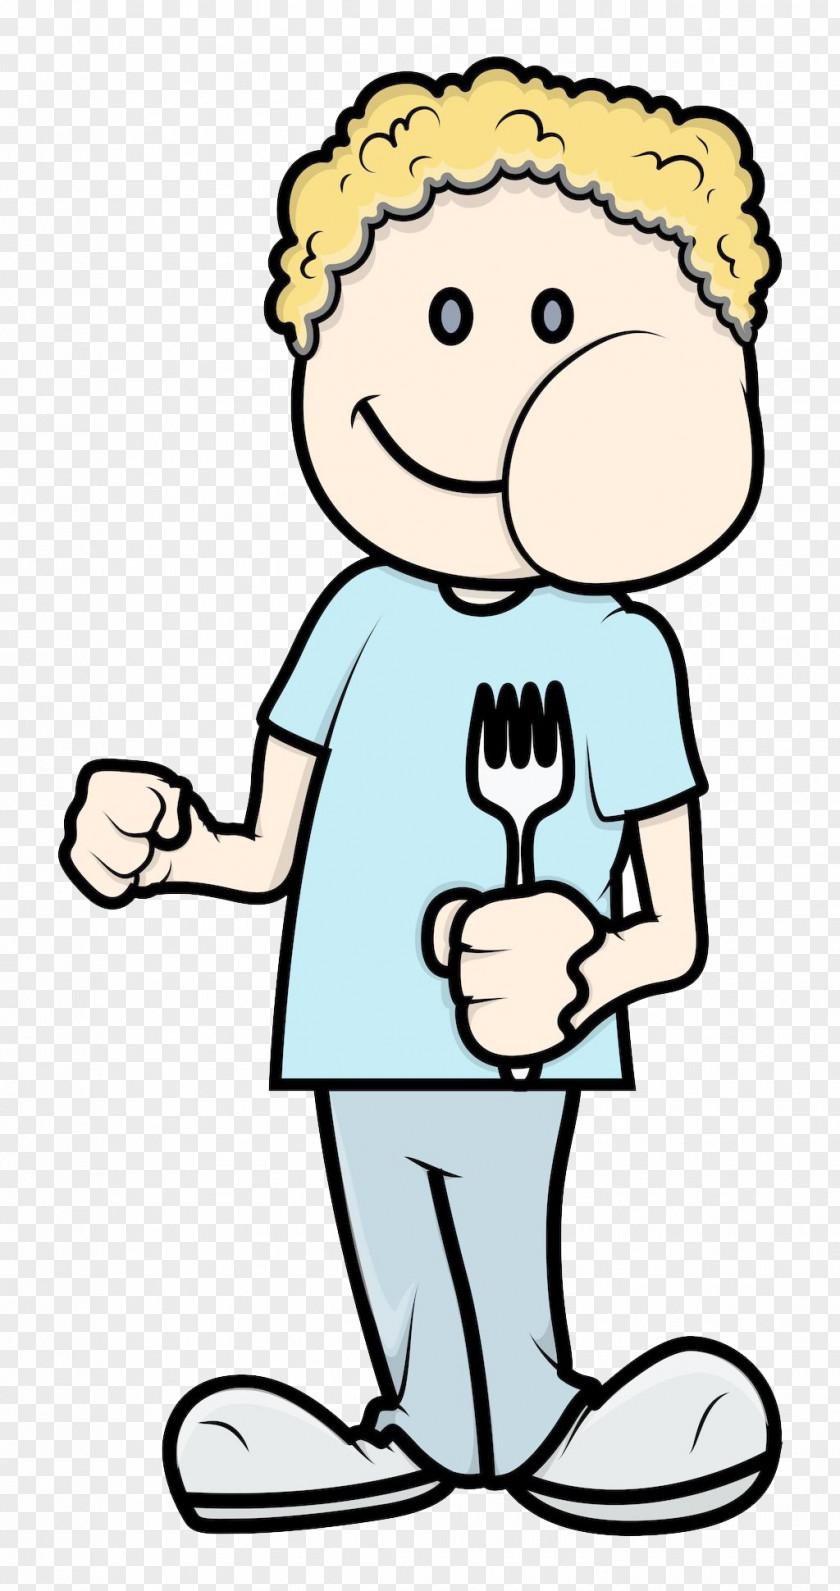 The Man With Fork Birthday Cake Cartoon Eating Clip Art PNG